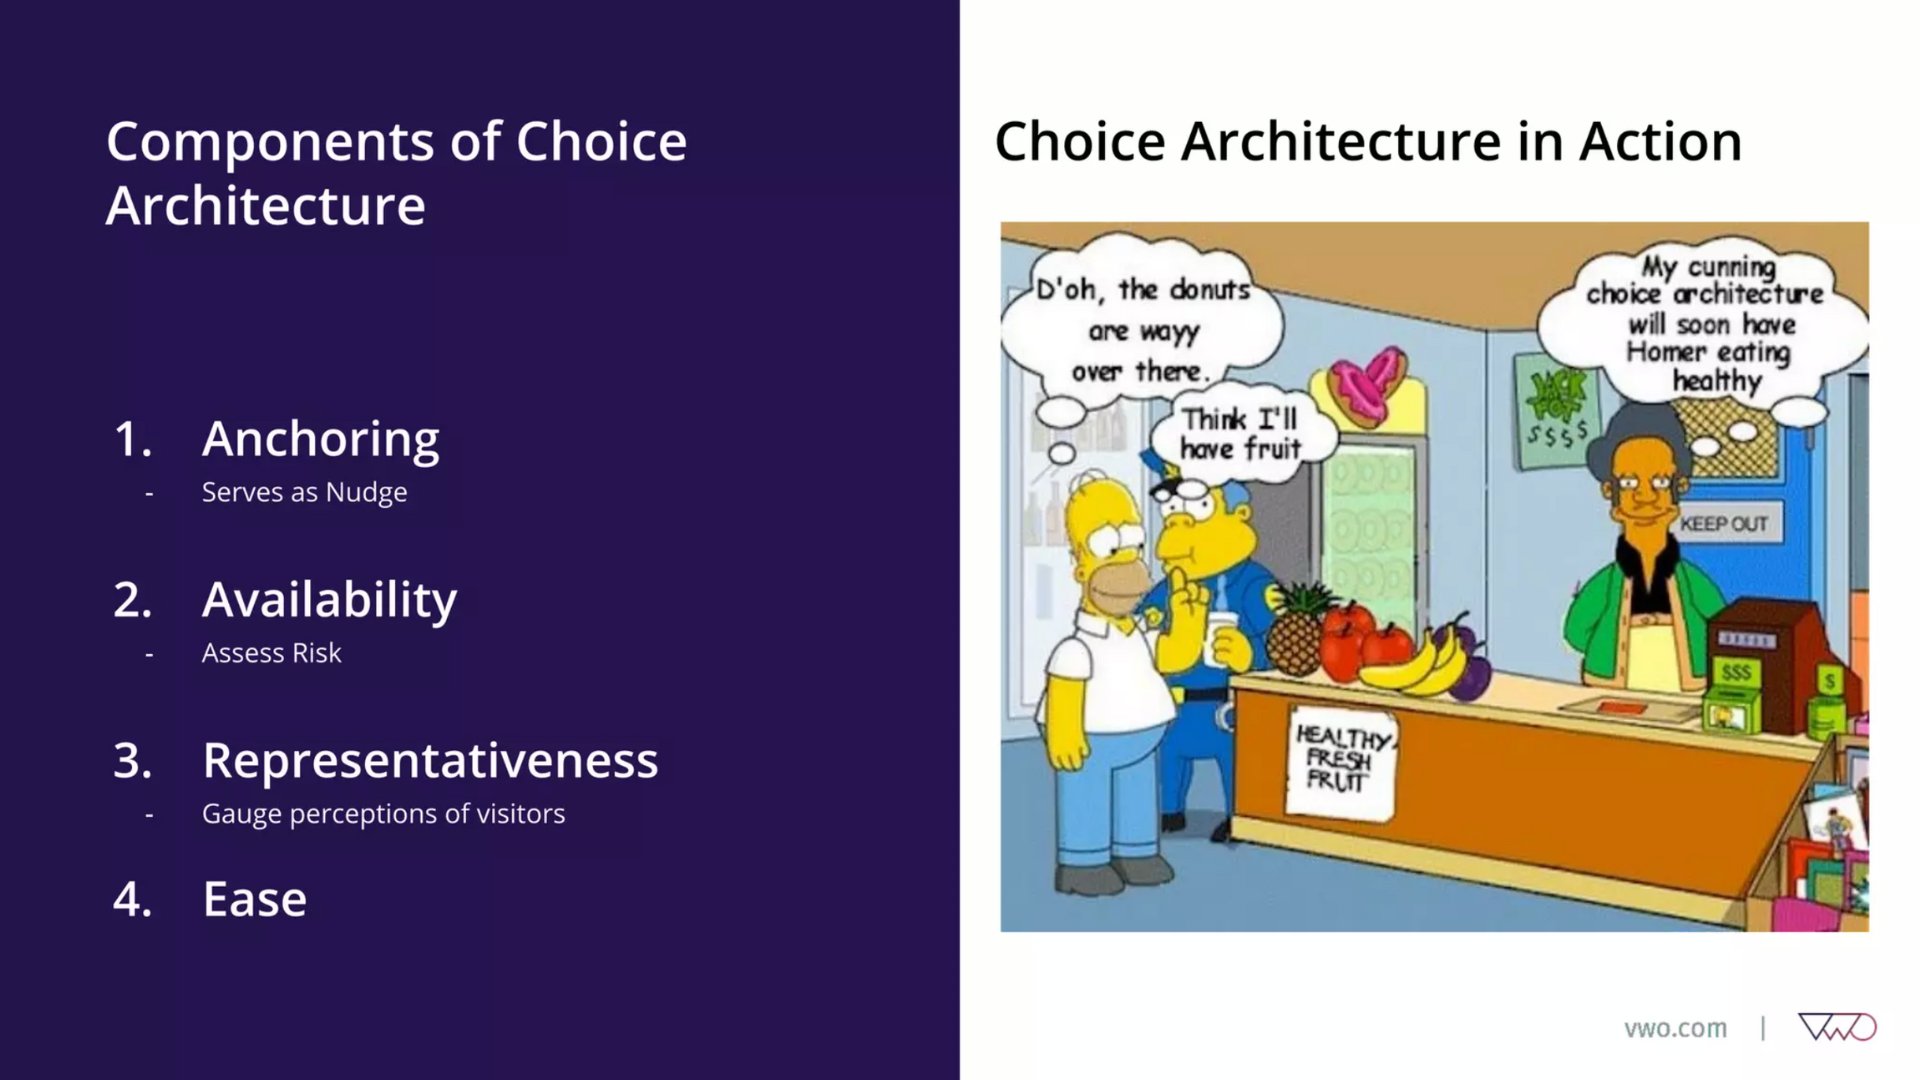 How ‘Choice Architecture’ can influence customer decisions